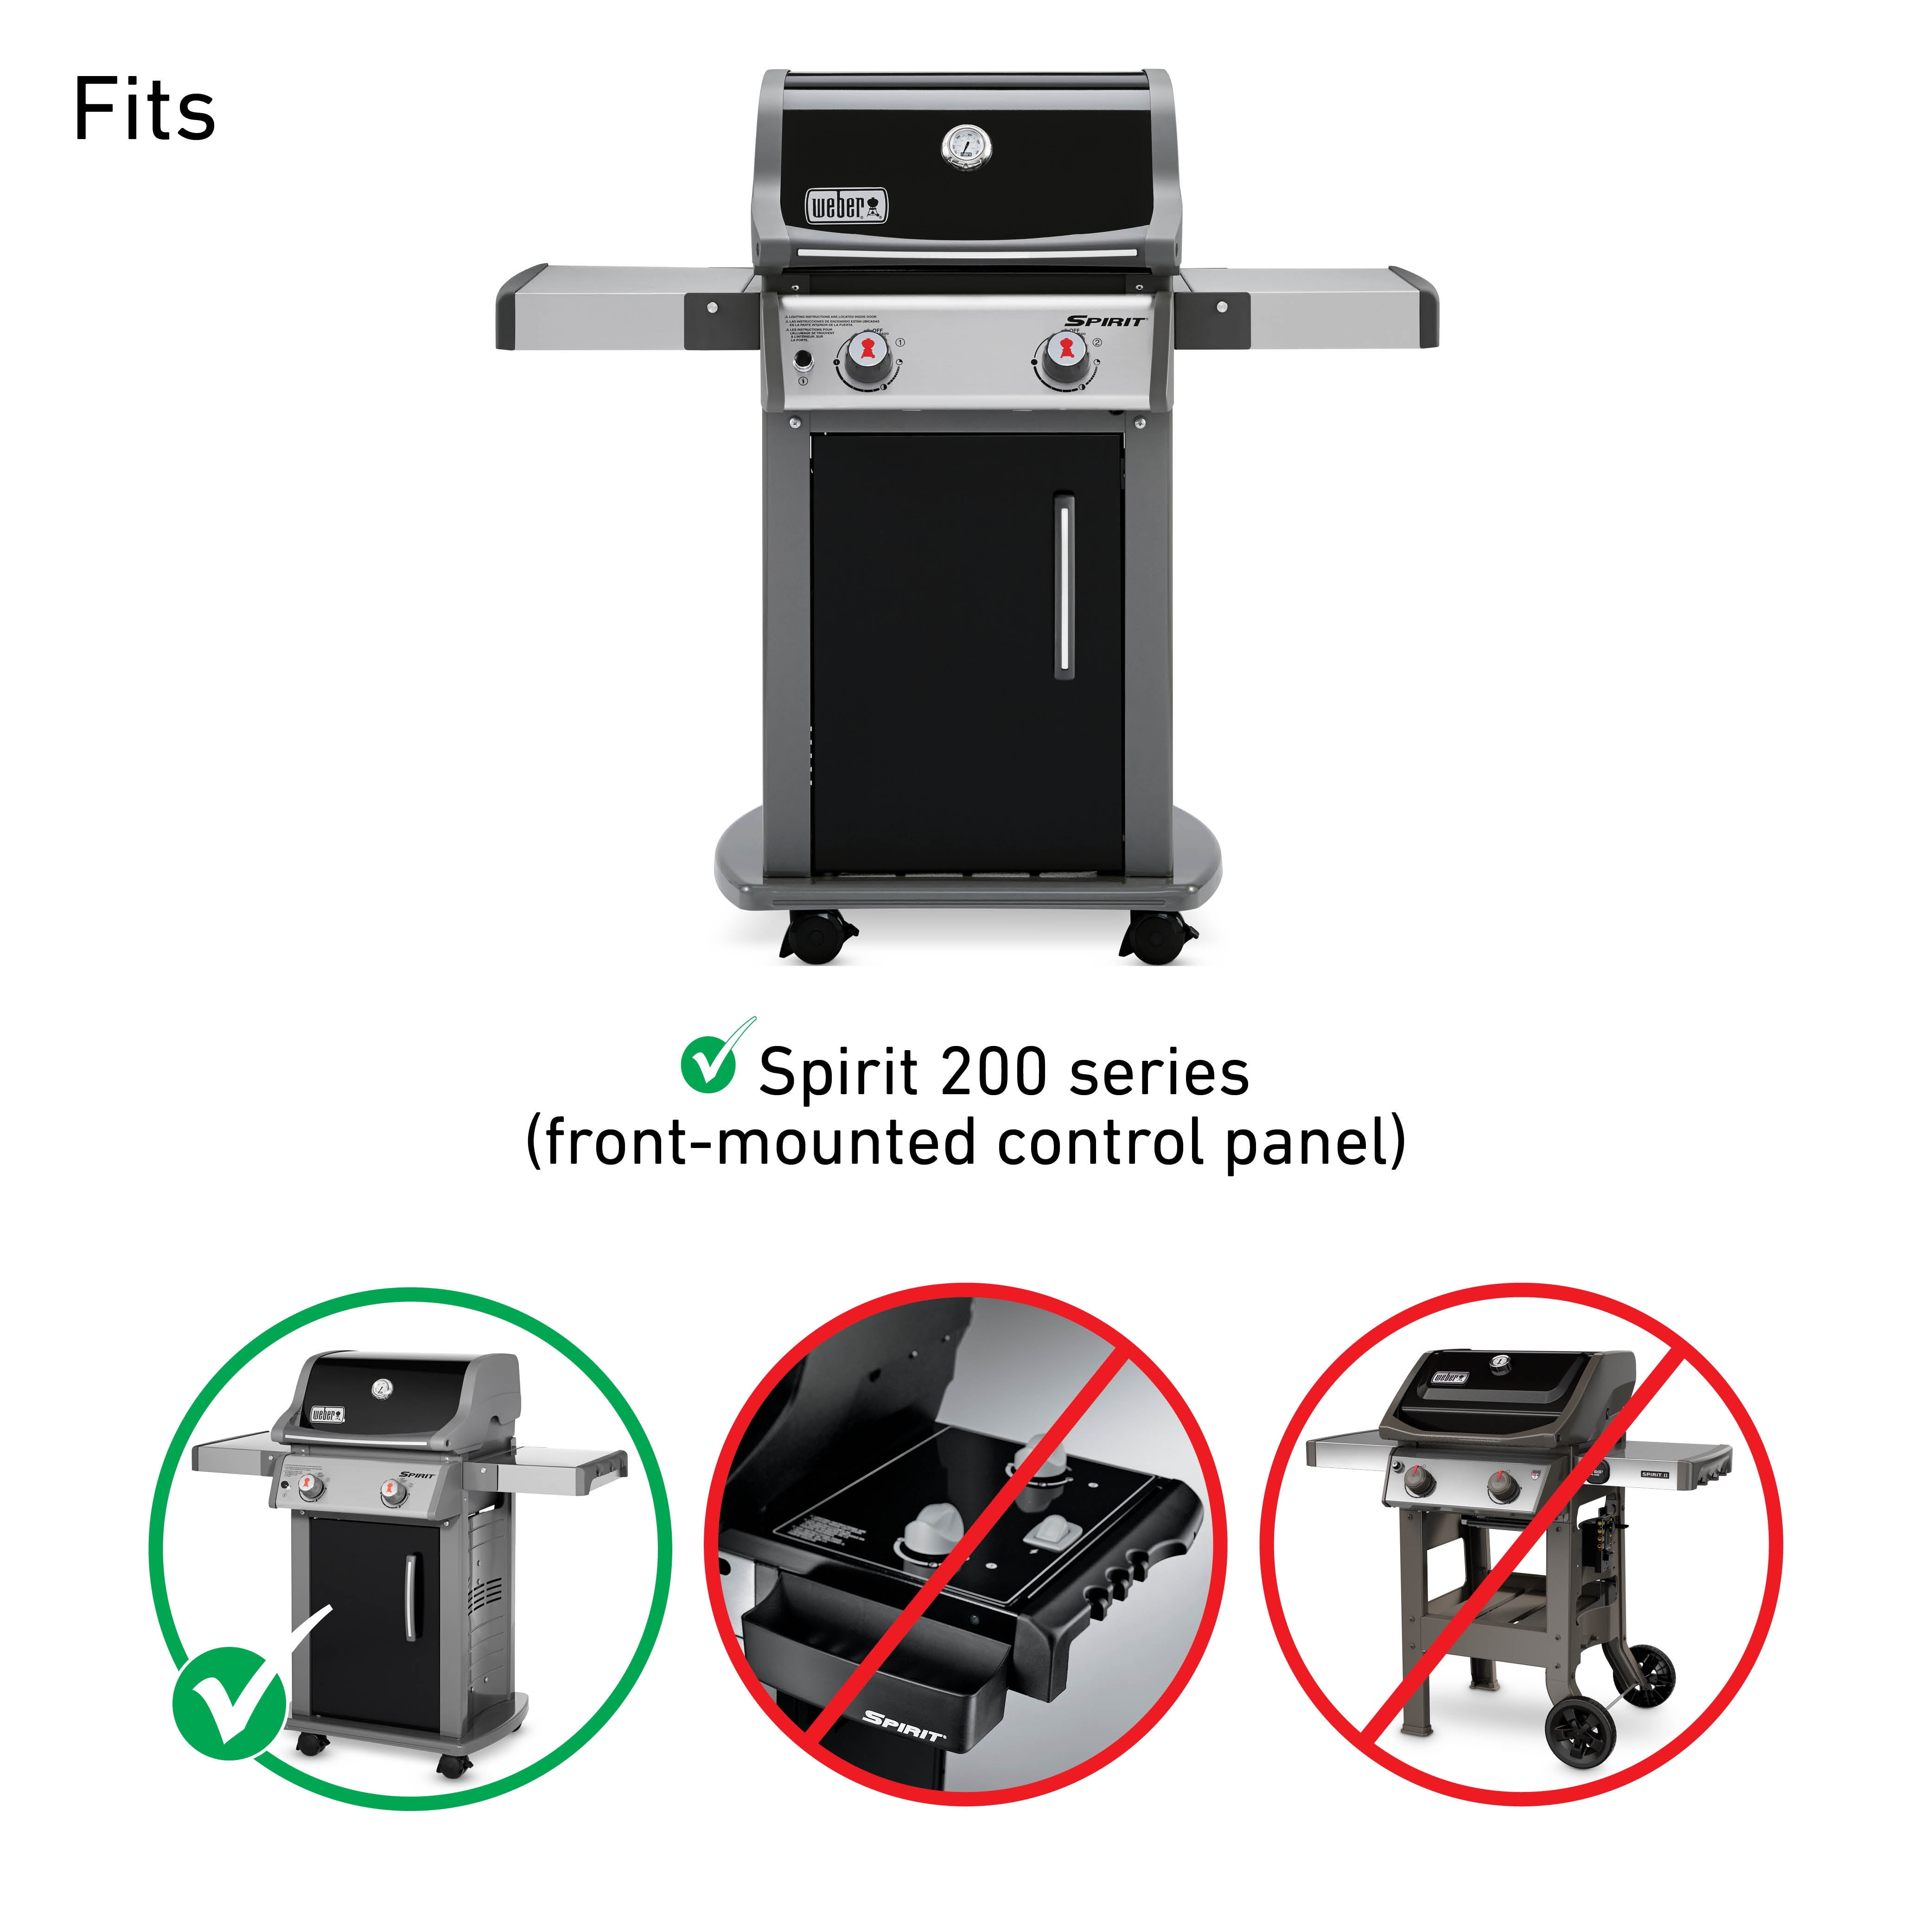 with Front-Mounted Control Panels Spirit E/S 200 & 210 Gas Grills 7635 15.3 Flavorizer Bars Stainless Steel Heat Plates Shield Tent for Weber Spirit 200 Series 16GA 